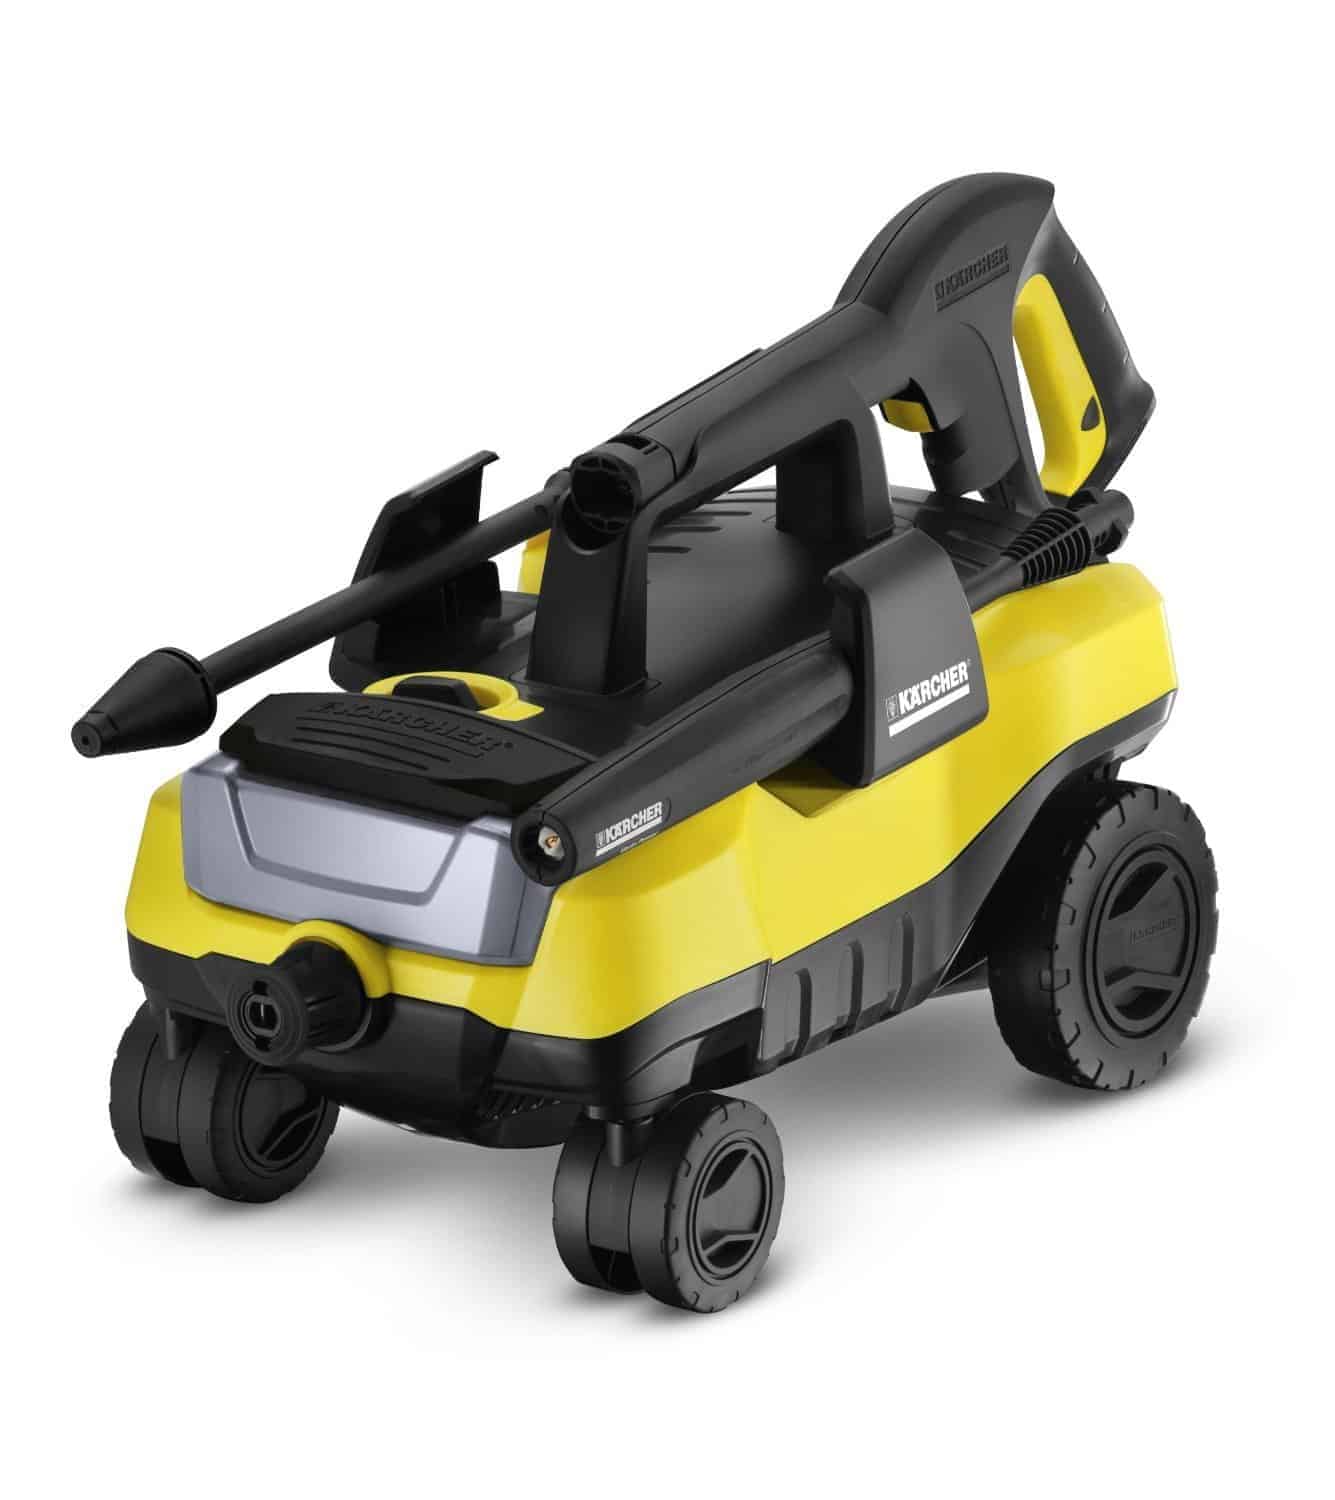 Karcher K 3.000 Follow Me 1800PSI 1.3GPM Electric Pressure Washer review